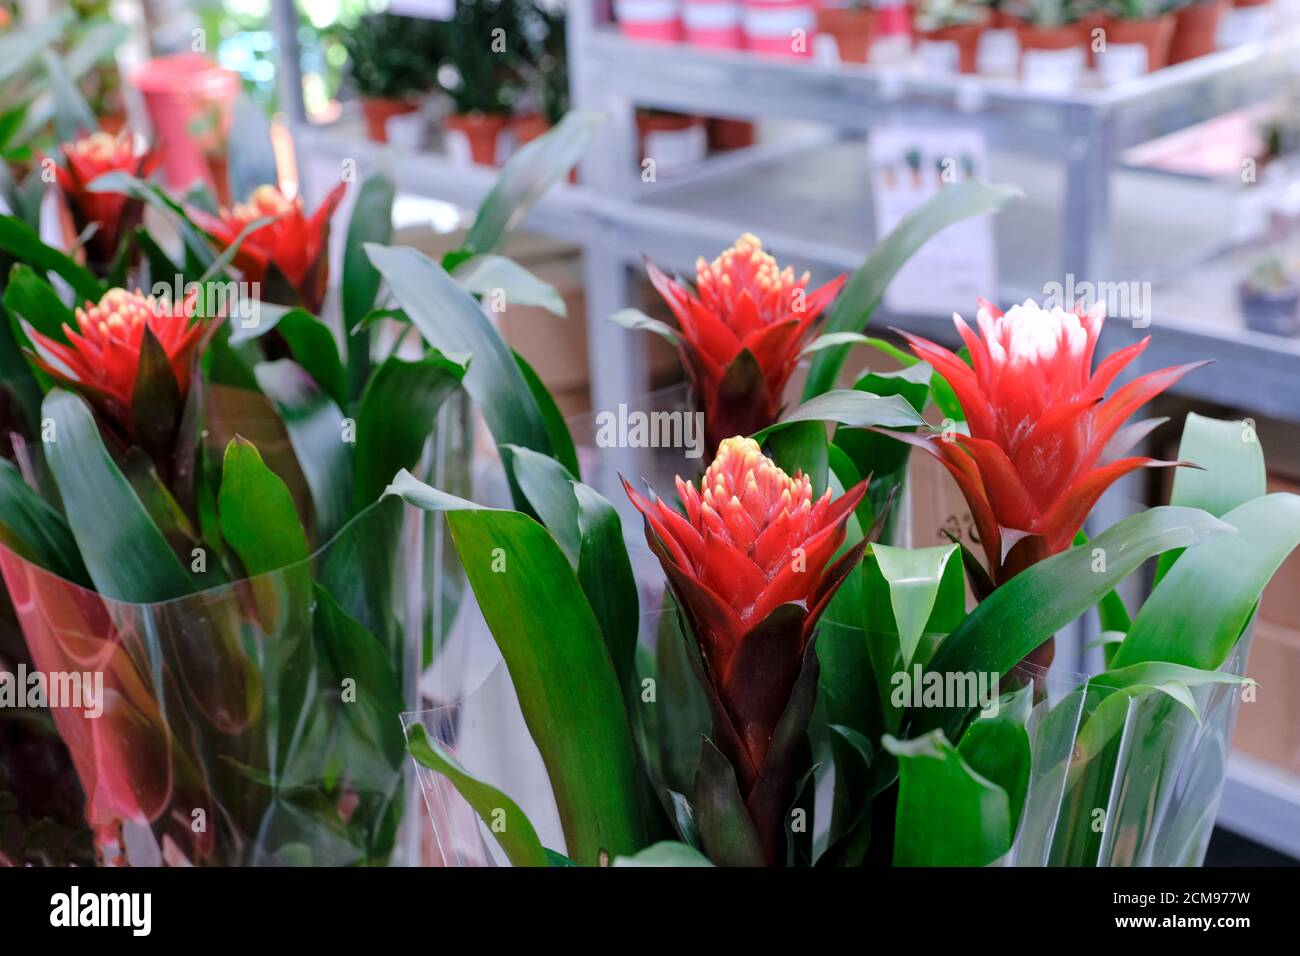 Bromelia Guzmania, flower with red petals and green leaves. Guzmania (tufted airplant) is a genus of over 120 species of flowering plants in the botan Stock Photo